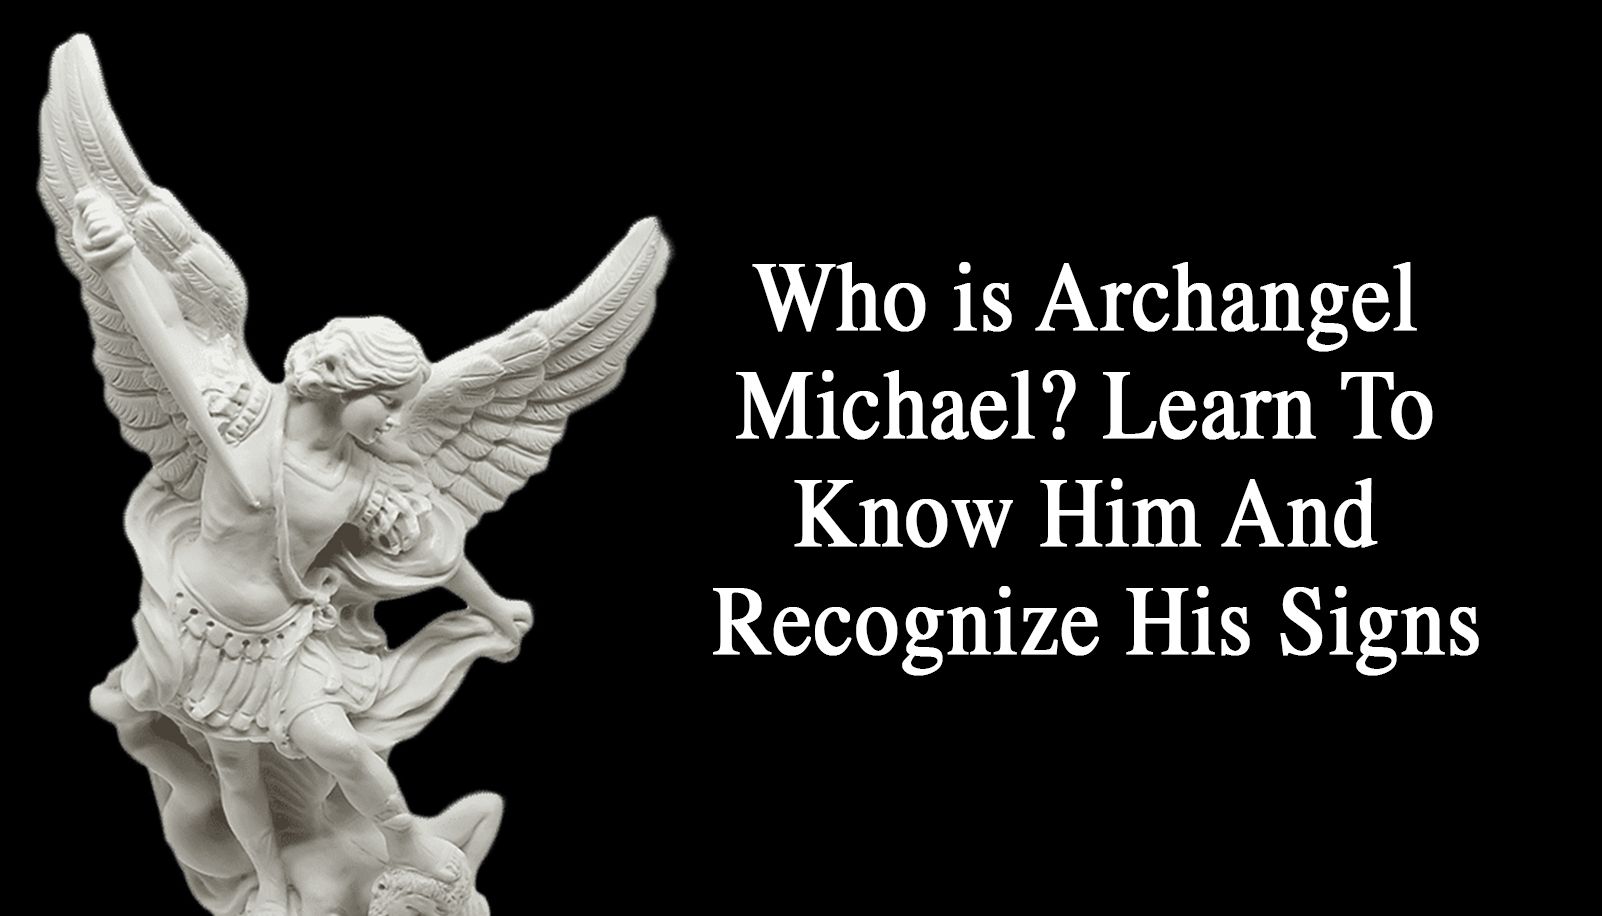 Who is Archangel Michael? Learn To Know Him And Recognize His Signs